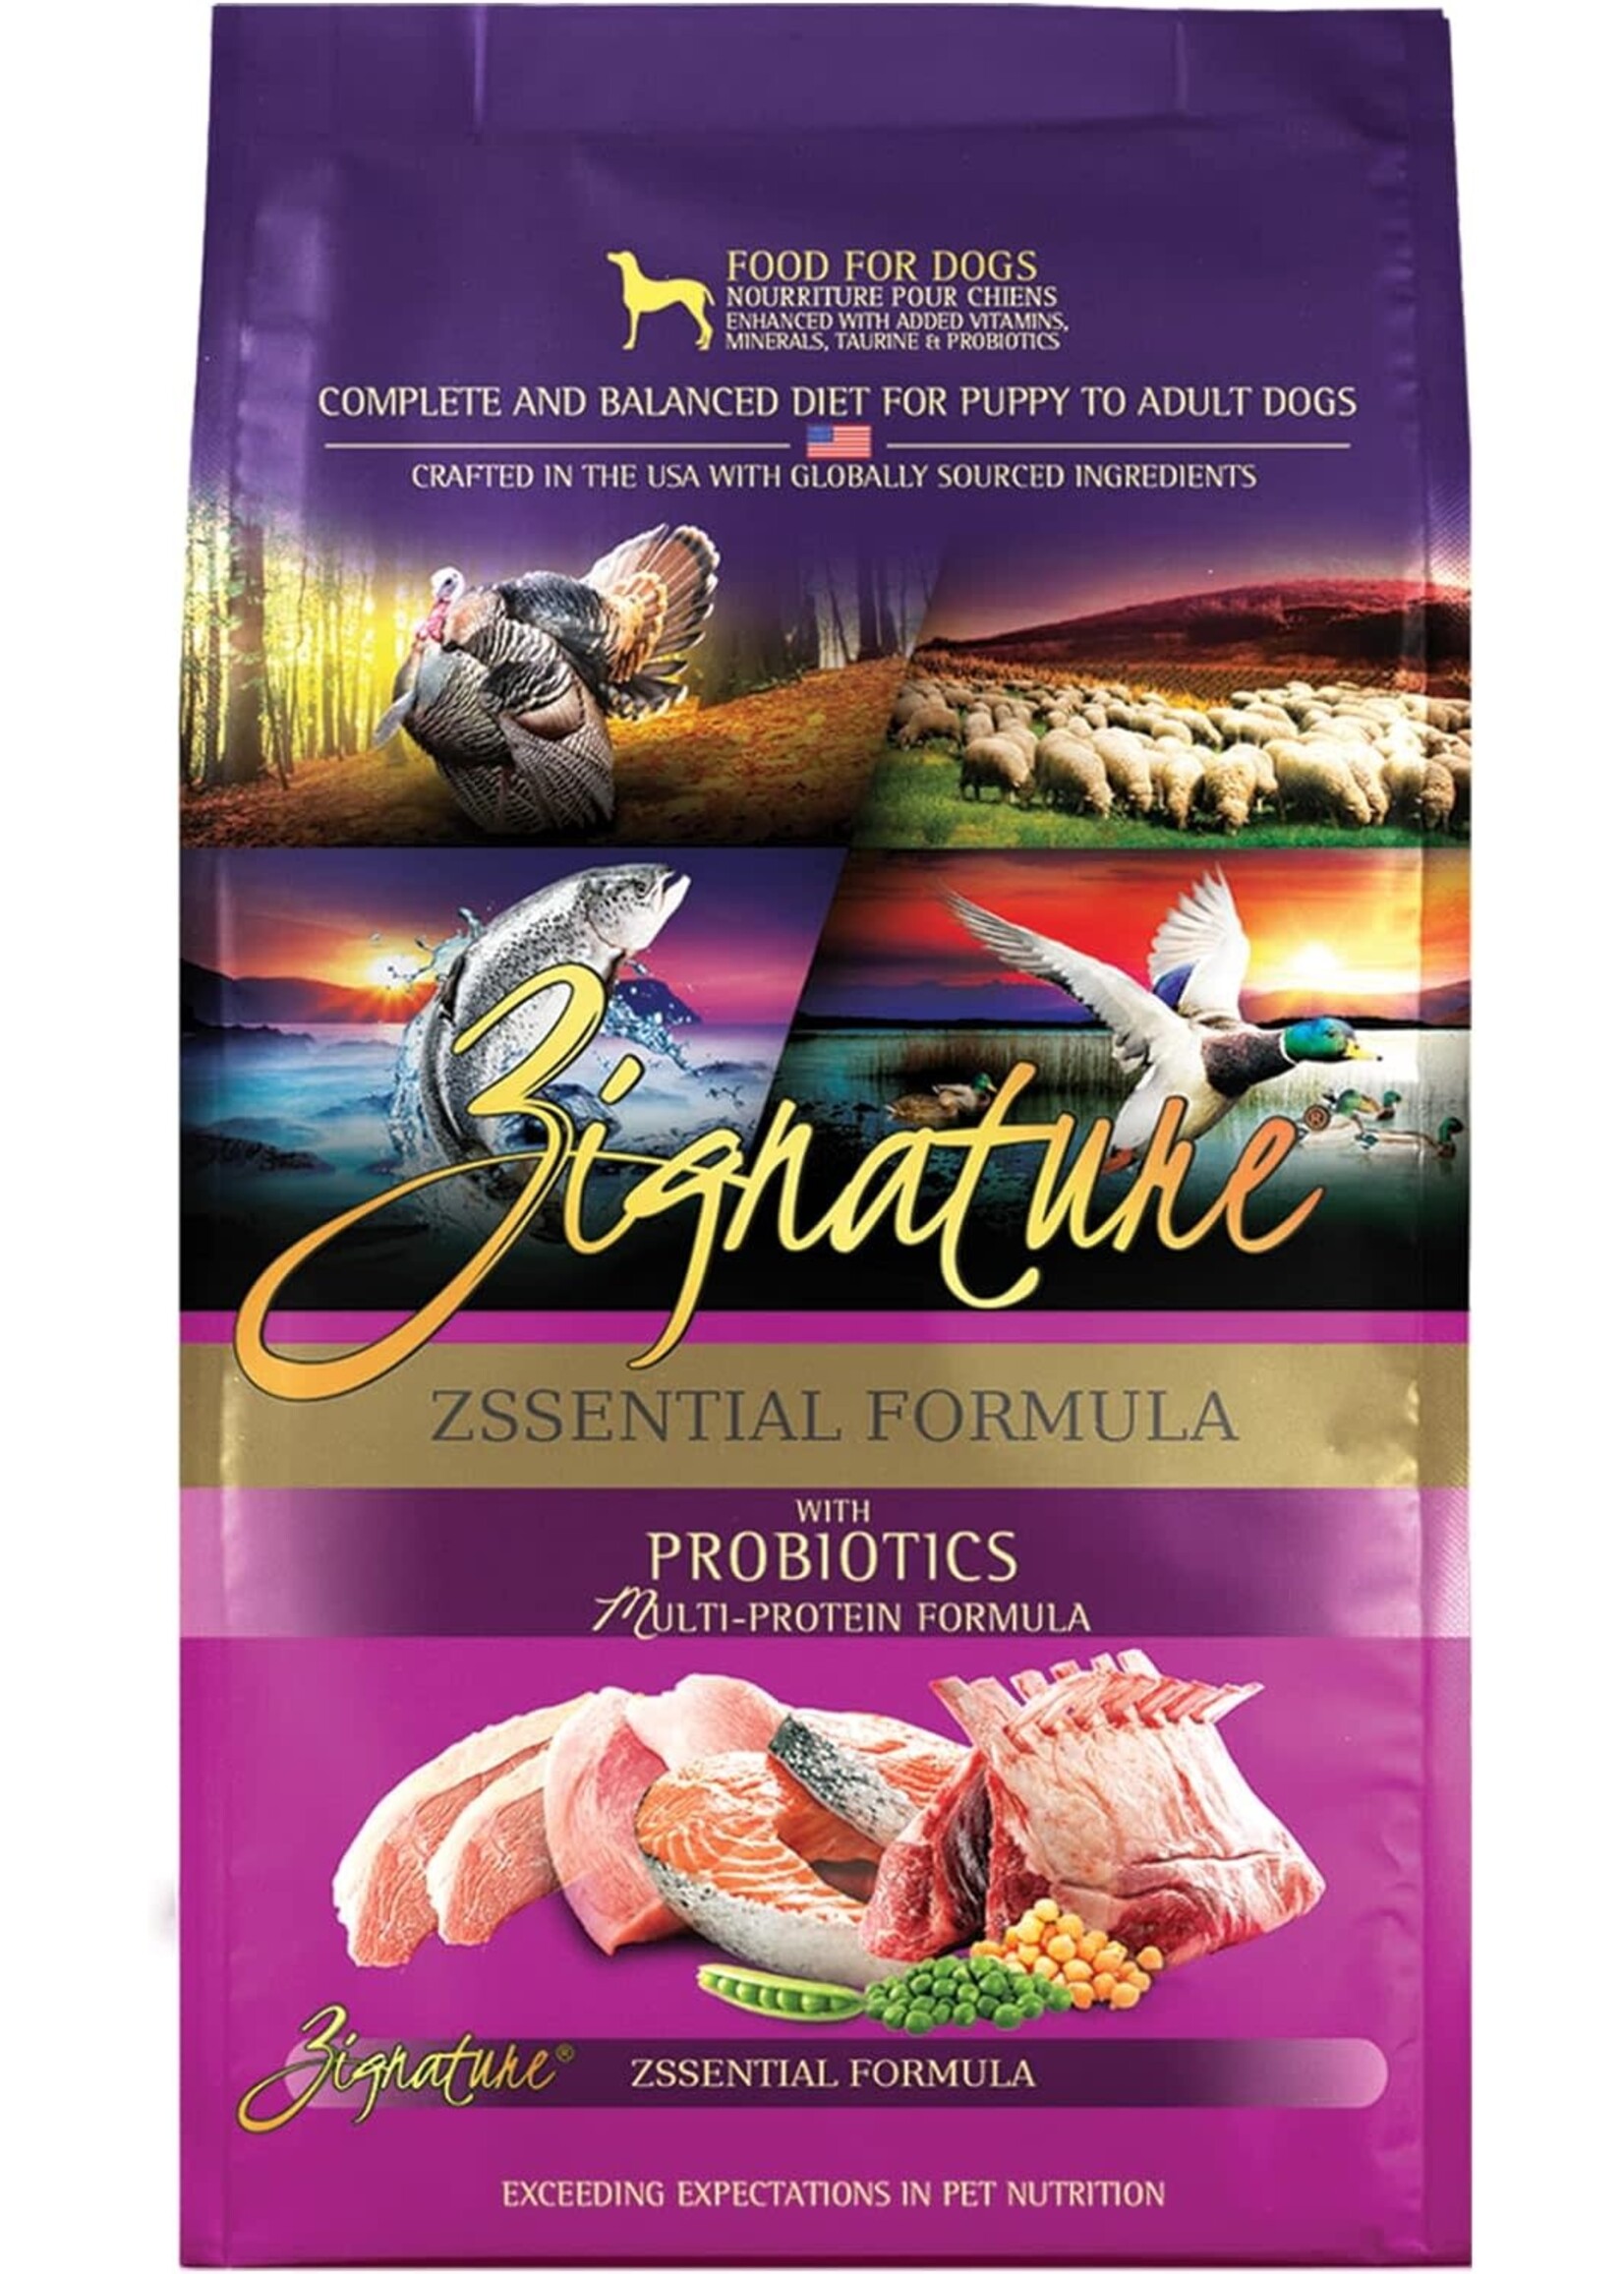 Zignature Zssential Formula with Probiotics Multi Protein Formula Grain Free All Life Stages Dog Food 4 lbs